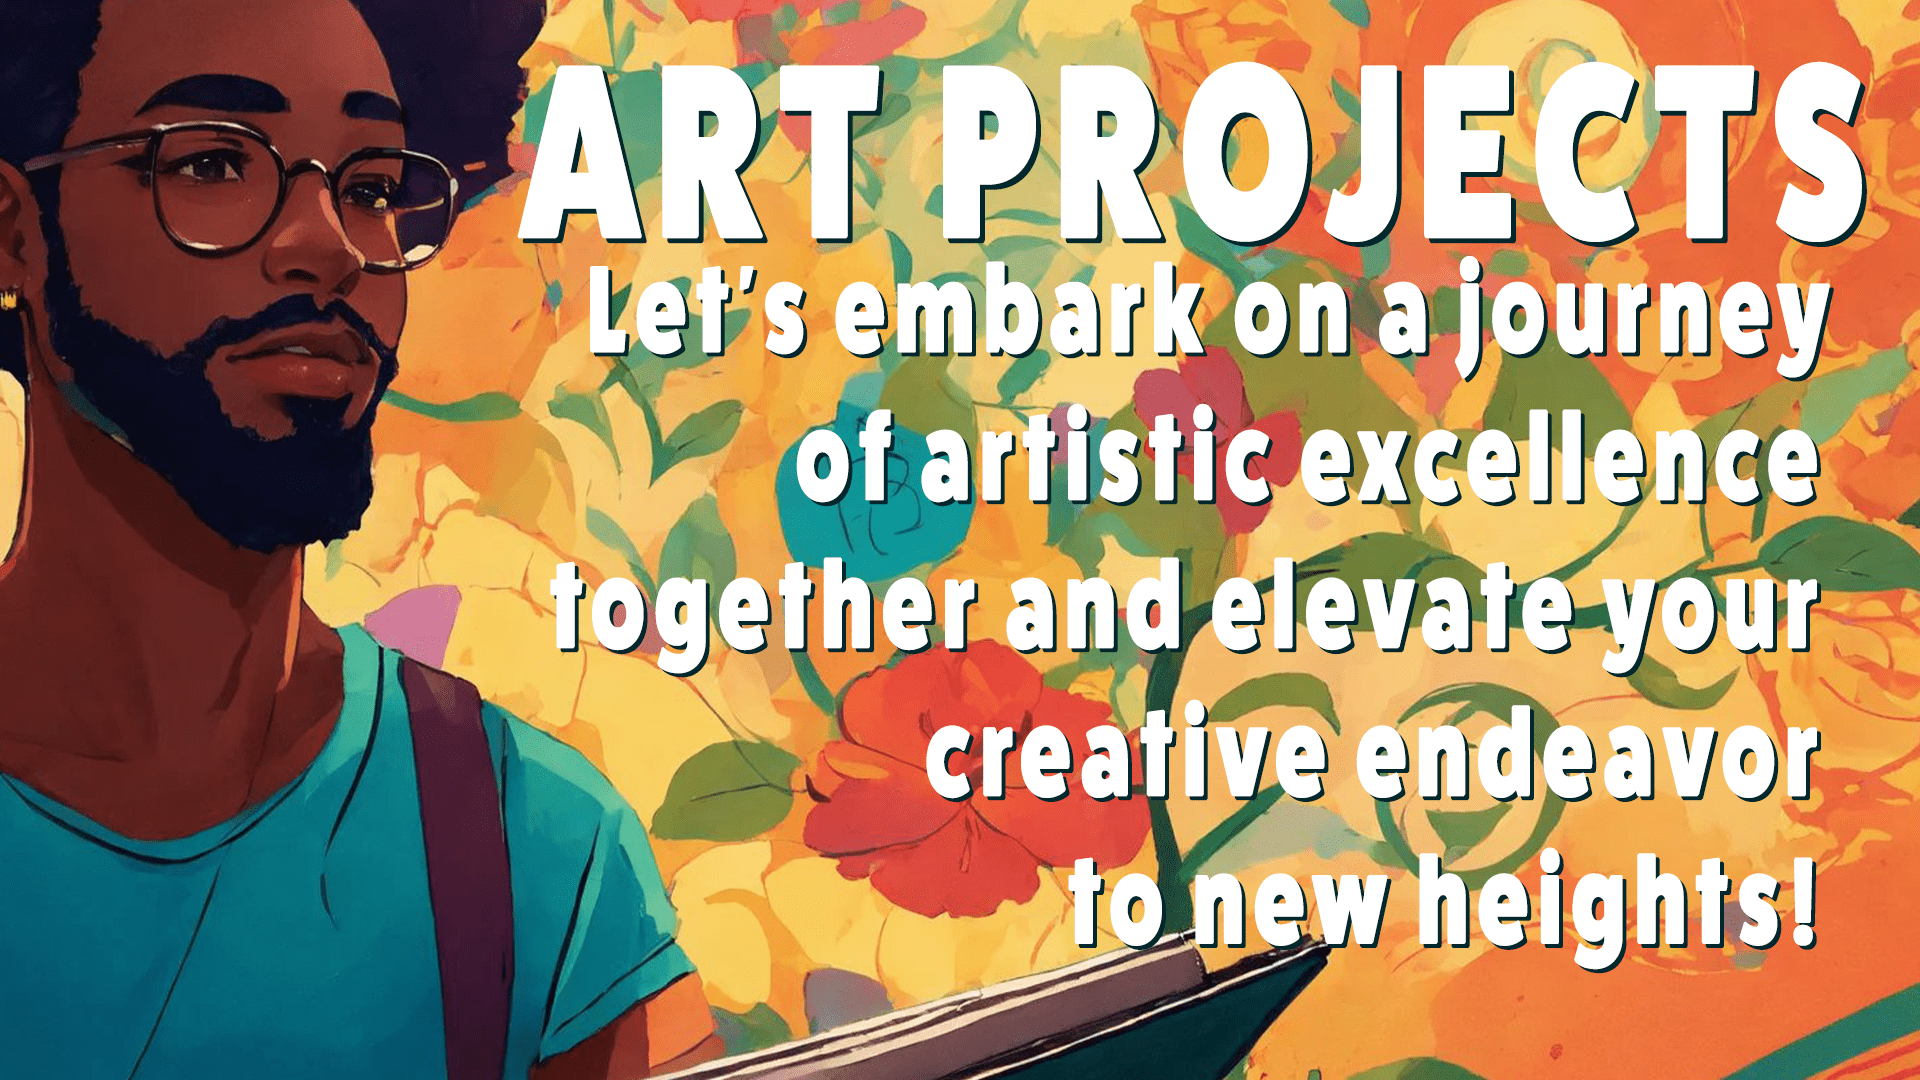 Let's embark on a journey of artistic excellence together and elevate your creative endeavor to new heights!